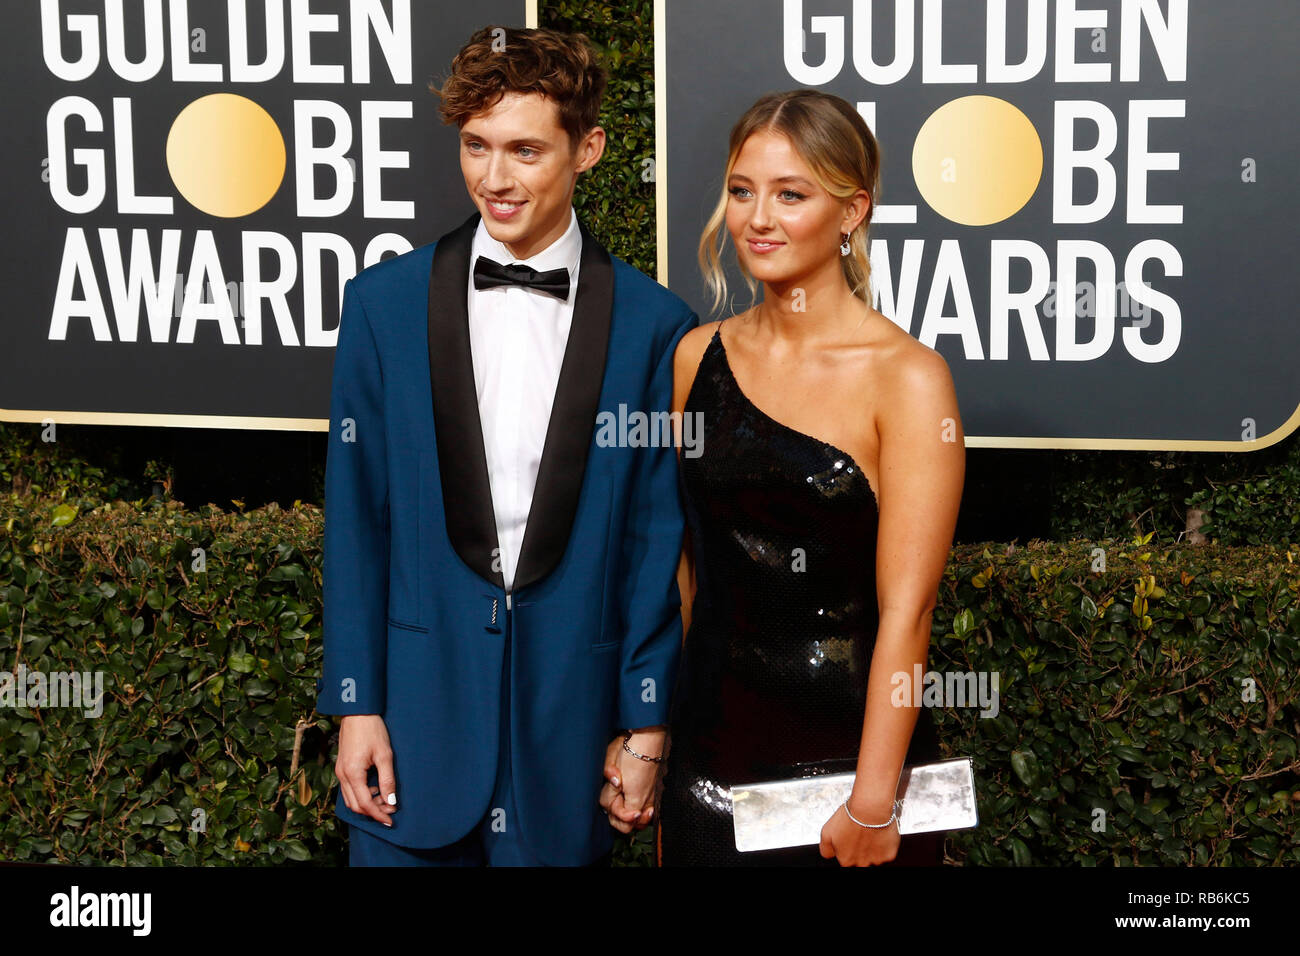 Troye Sivan and Sage Mellet attending the 76th Annual Golden Globe Awards at the Beverly Hilton Hotel on January 6, 2019. Stock Photo